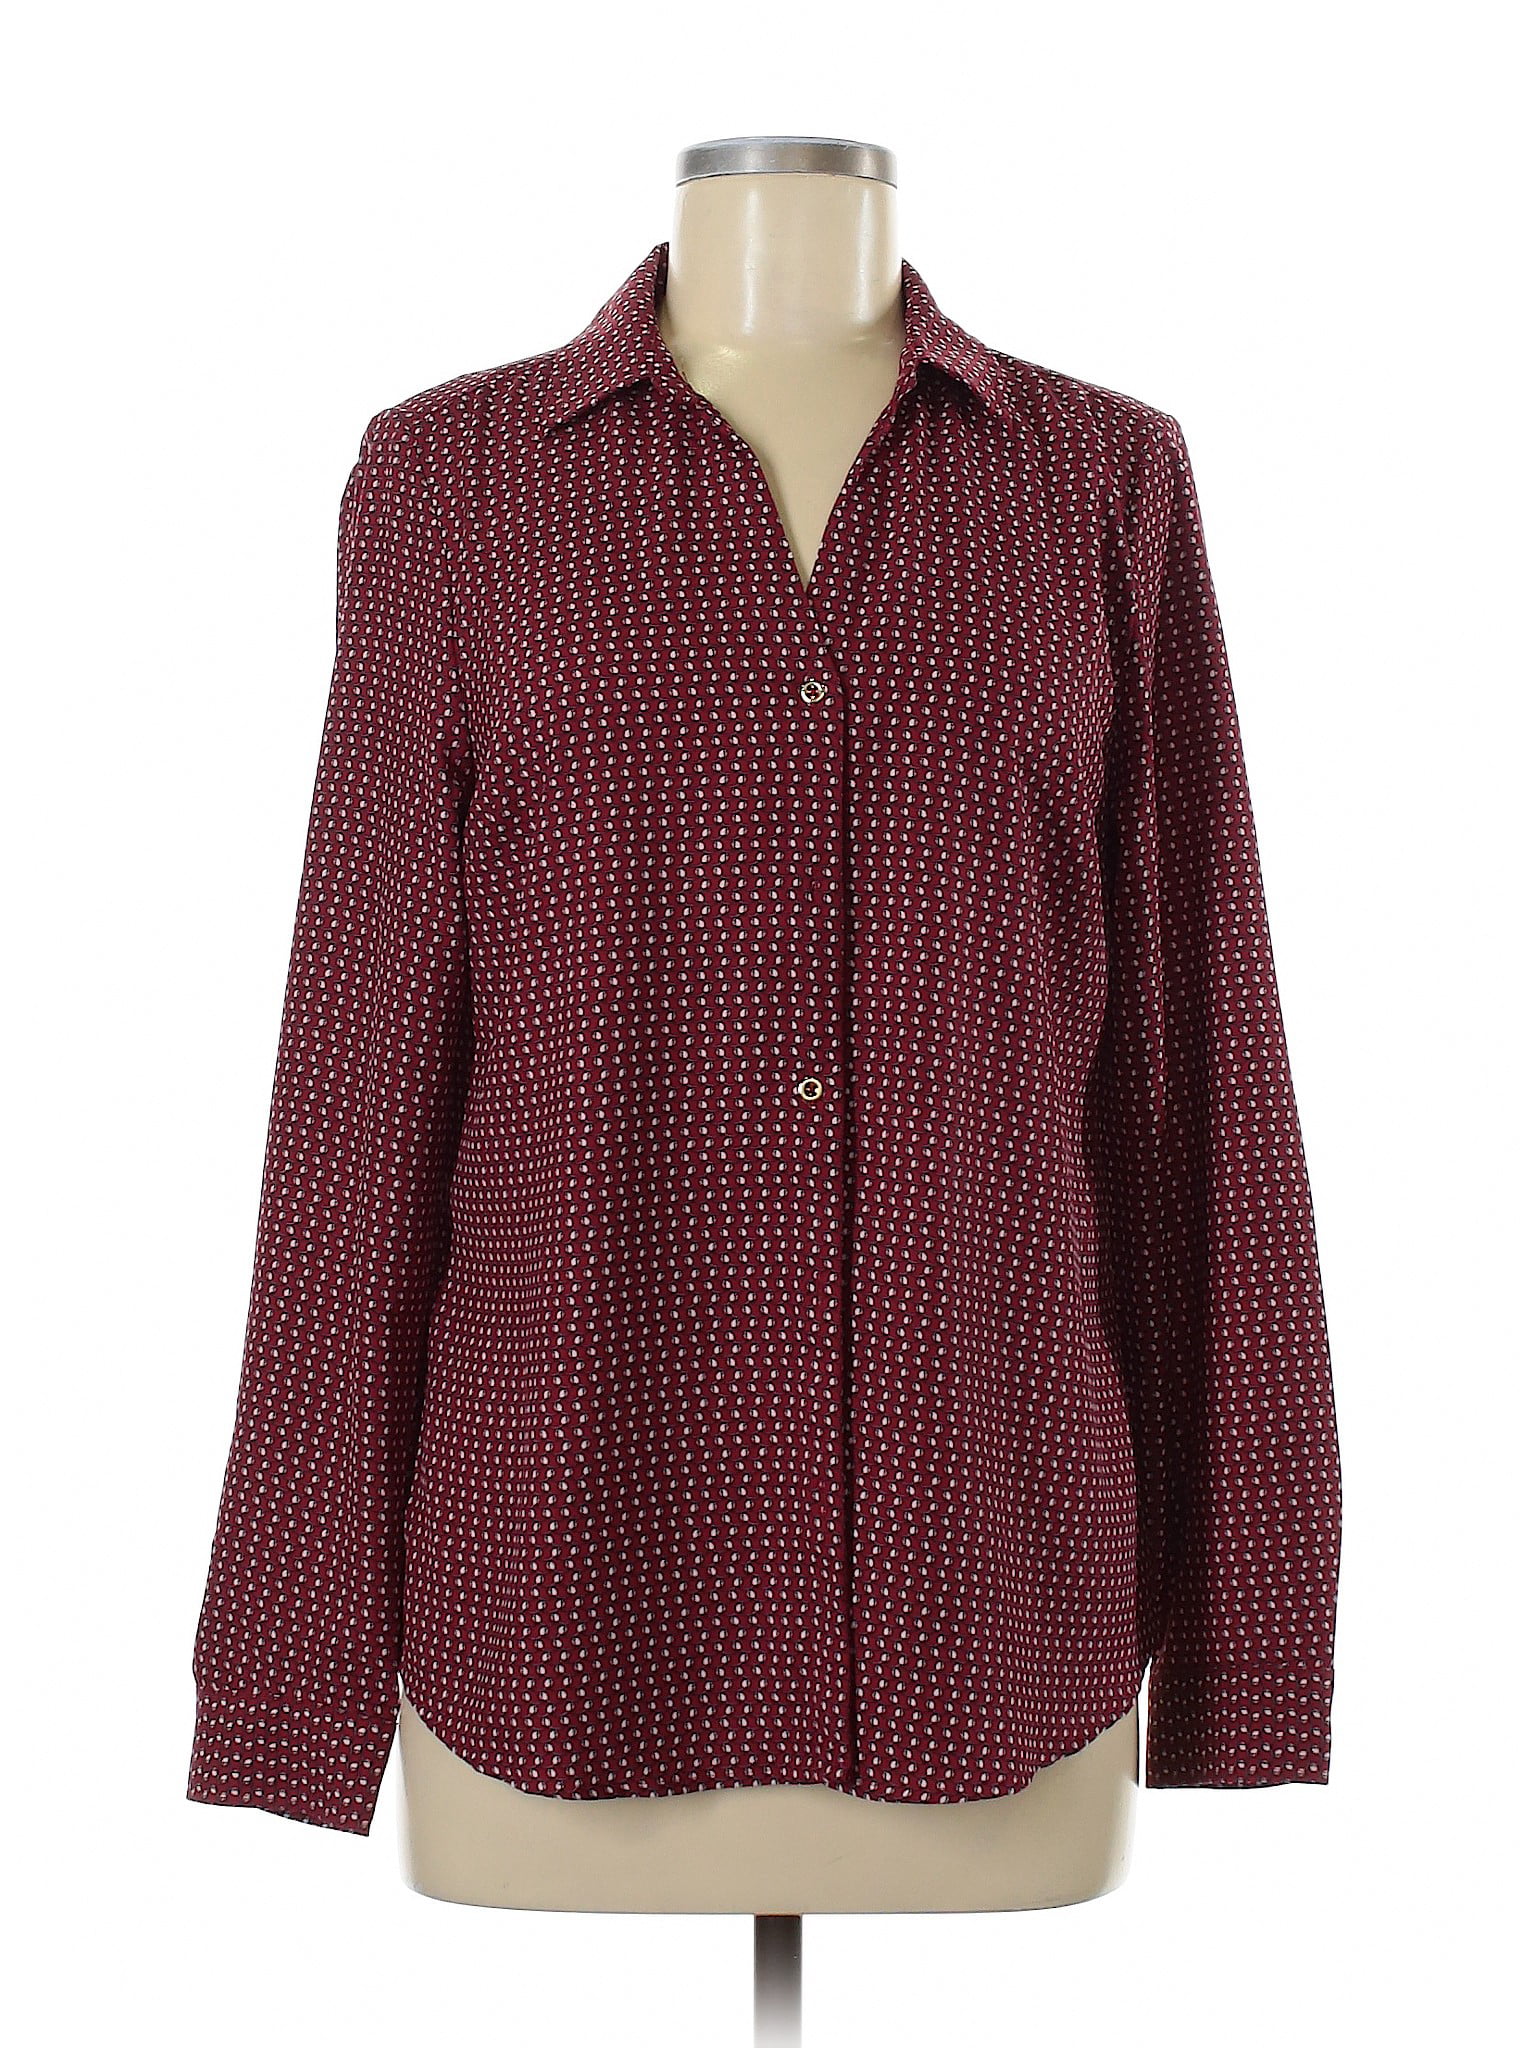 Roz & Ali - Pre-Owned Roz & Ali Women's Size M Long Sleeve Blouse ...